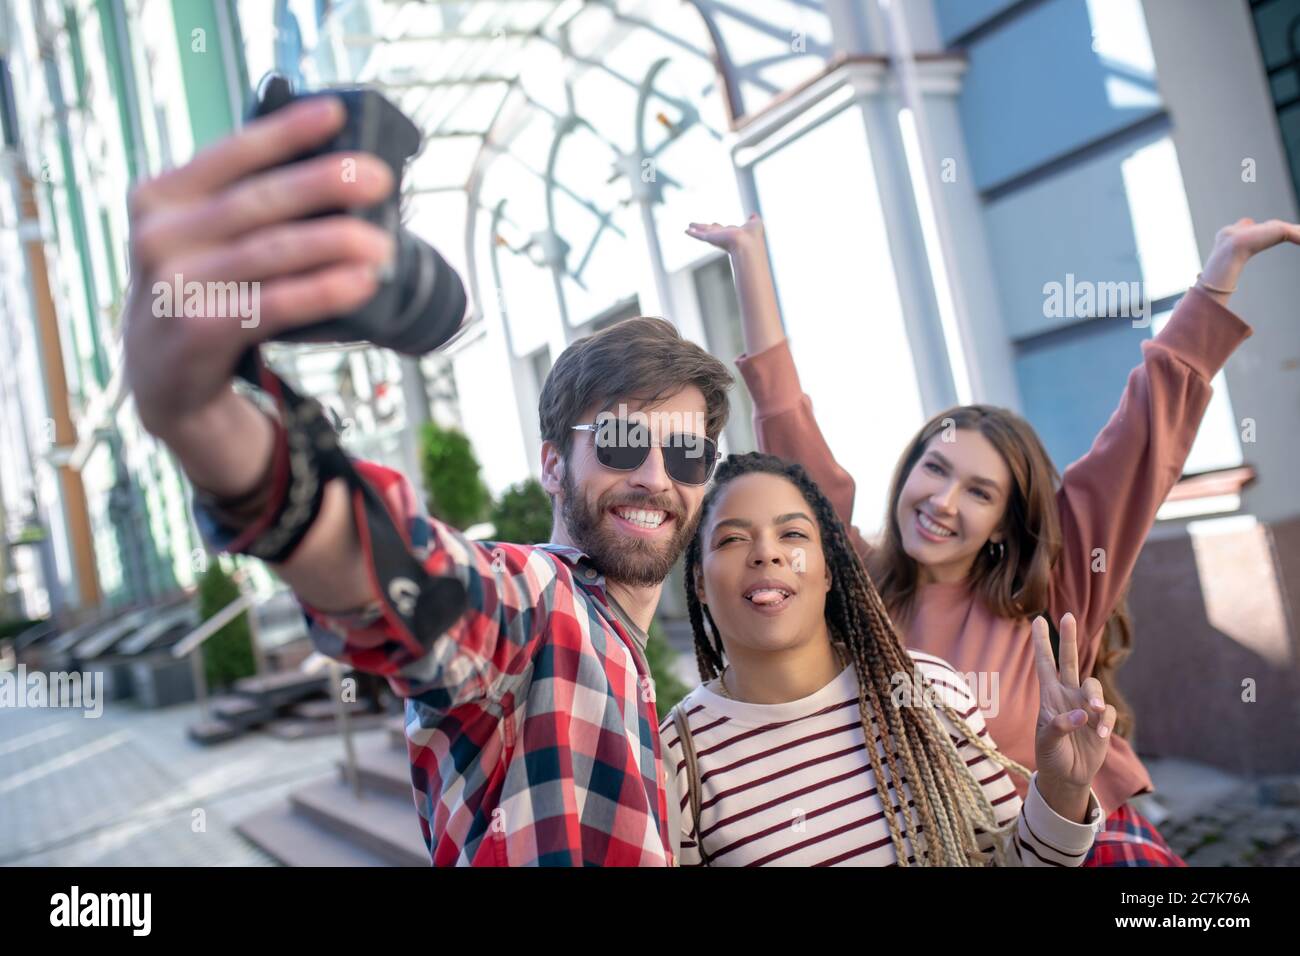 Guy taking selfie on camera with two girlfriends. Stock Photo